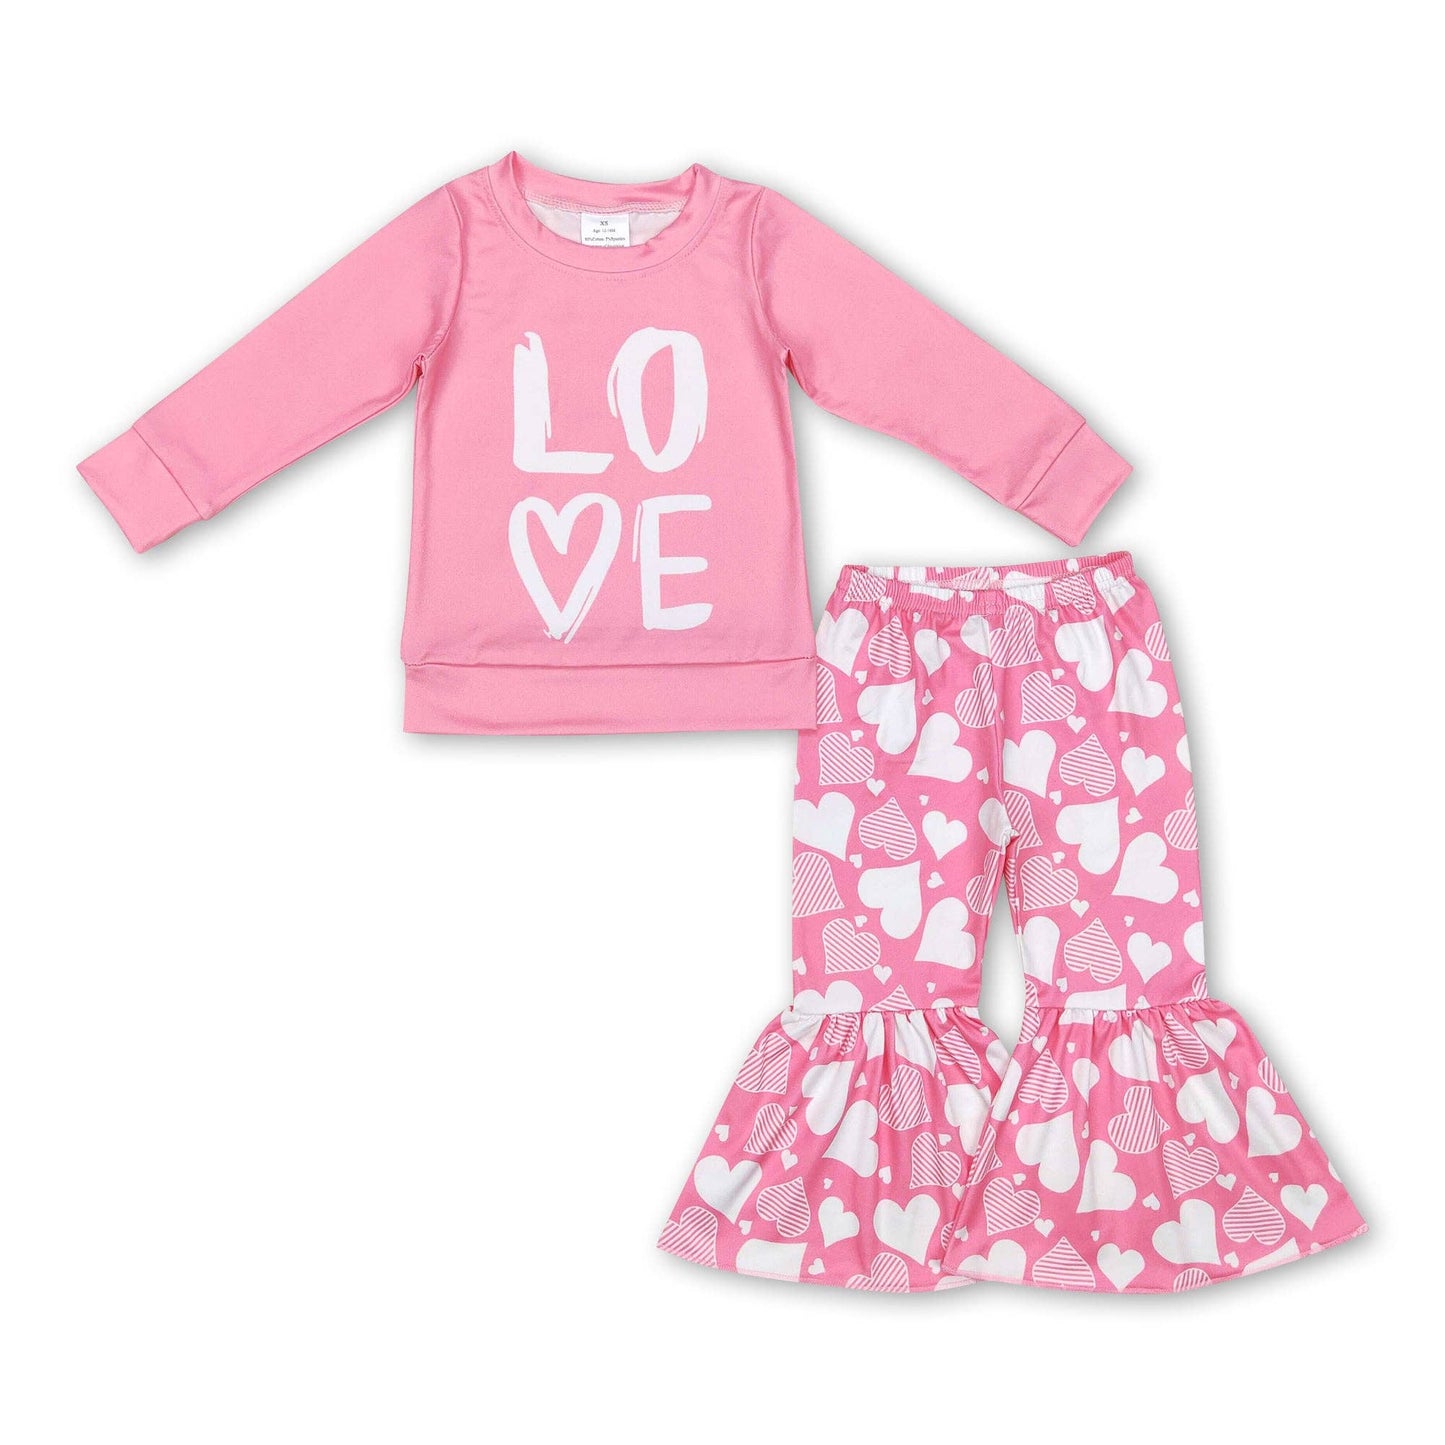 Pink love top heart bell bottom pants girls valentine's outf: 3T